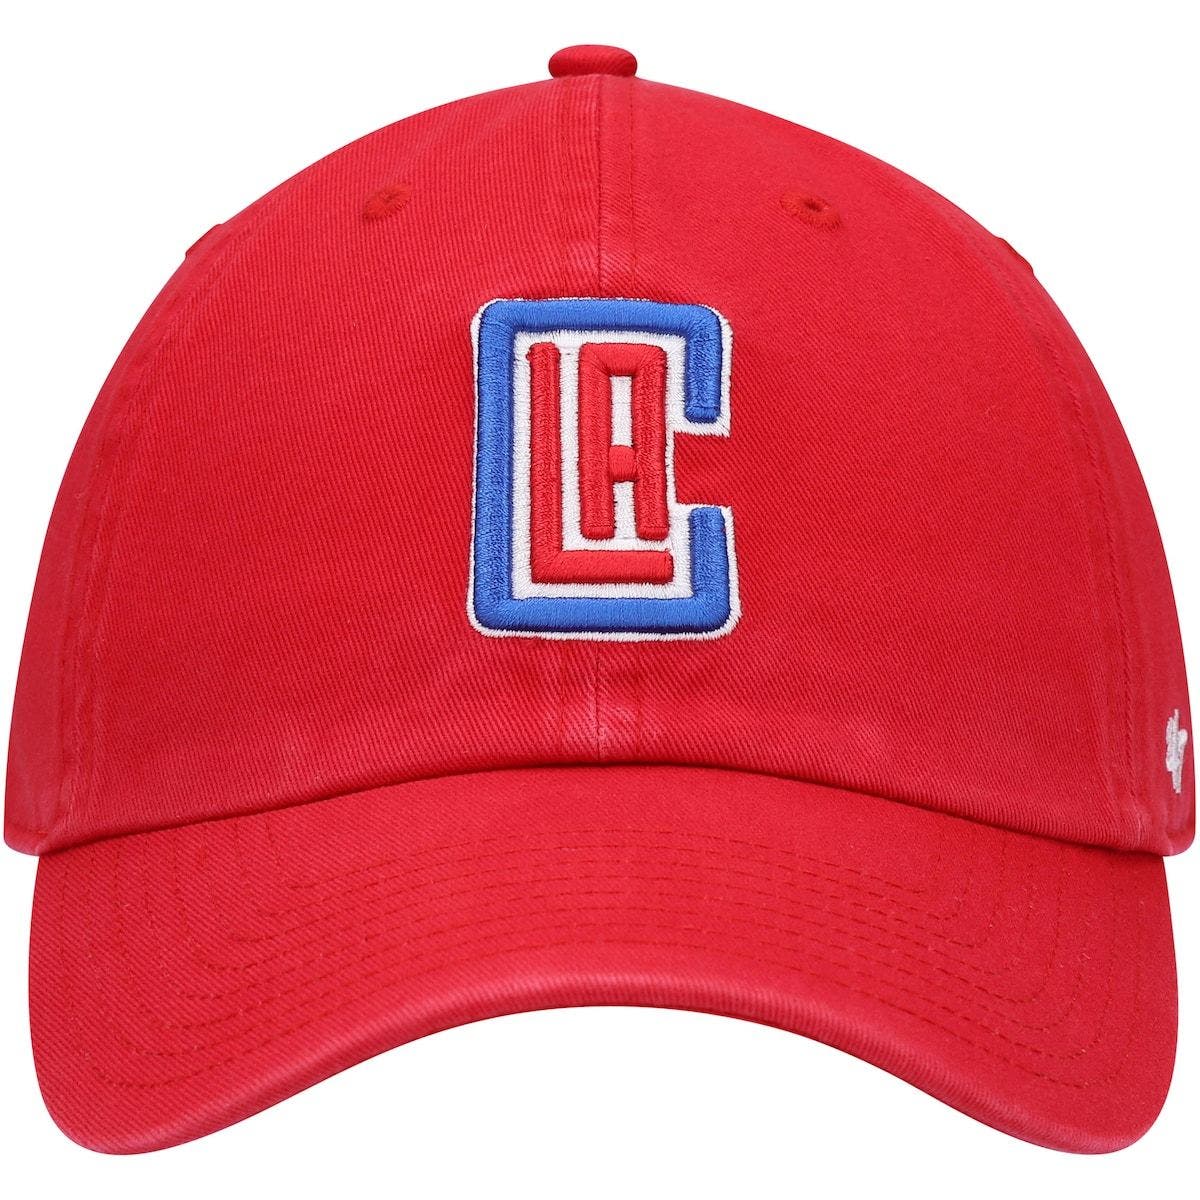 47 Los Angeles Clippers MVP Hat Structured Adjustable Cap Red